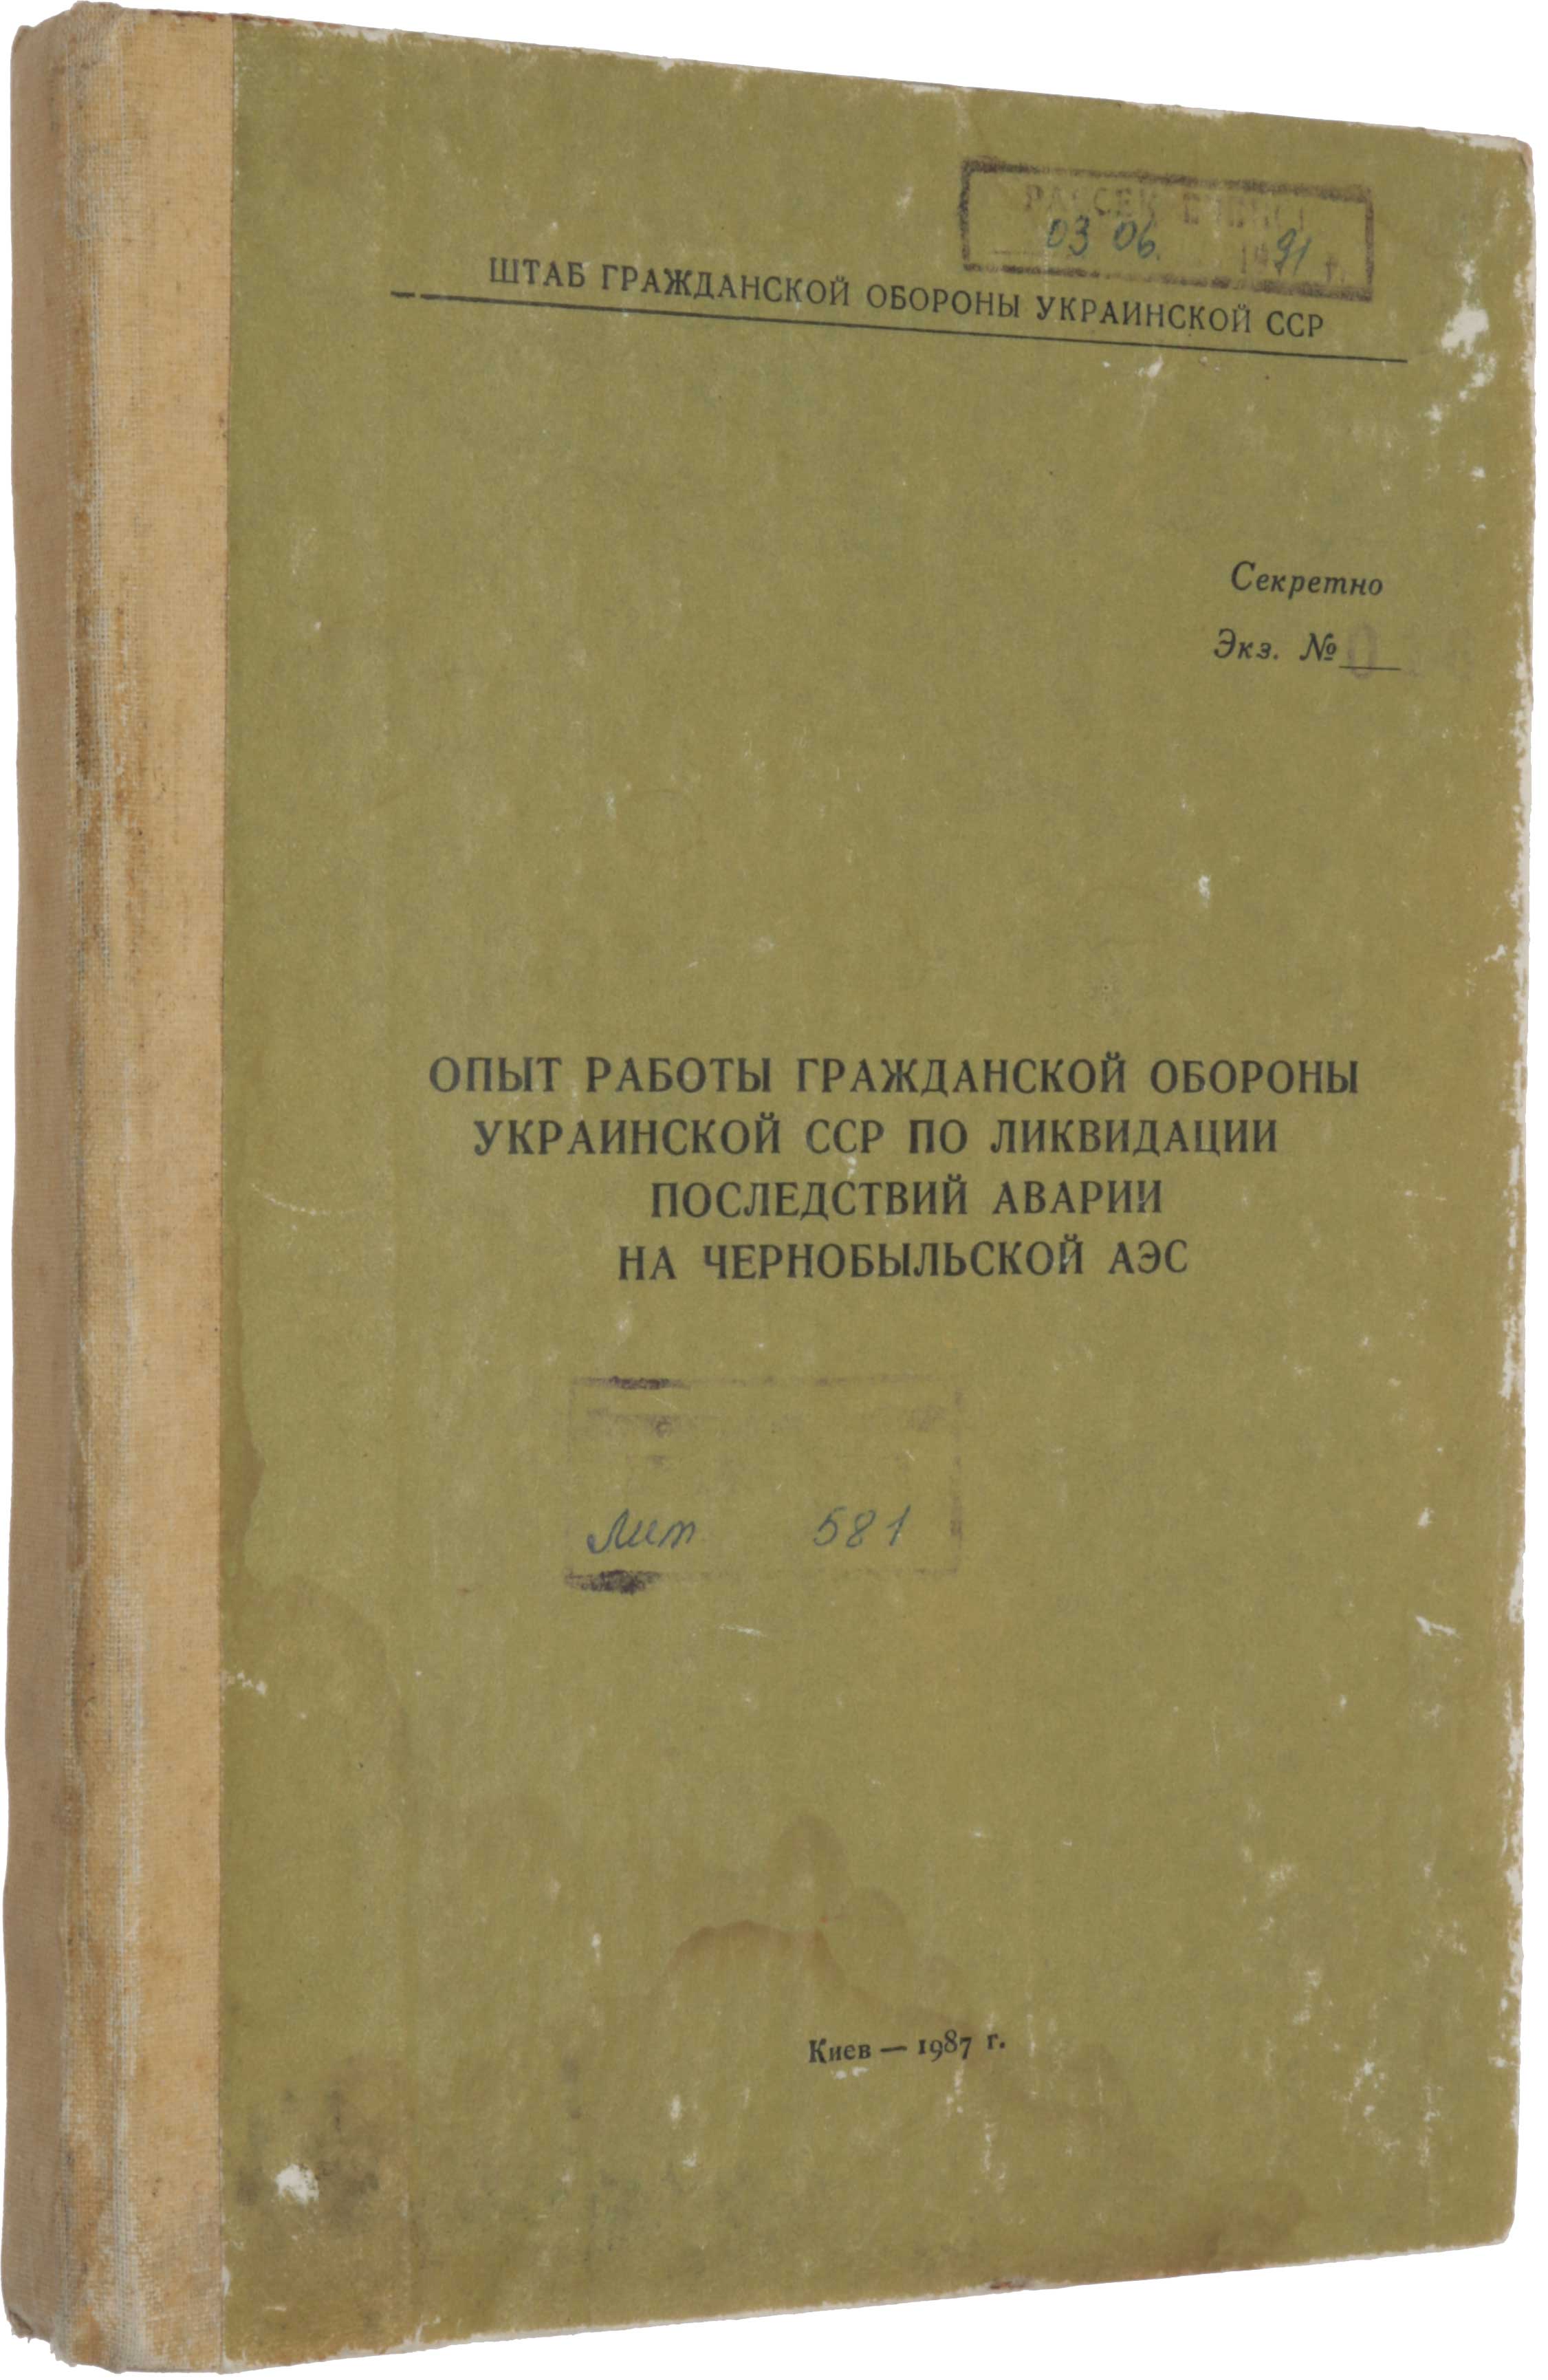 Item #5848 [Experience of the Civil Defence of the Ukrainian SSR in the Elimination of the Consequences of the Accident at the Chernobysk Nuclear Power Plant]. Lieutenant-General N. S. BONDARCHUK.